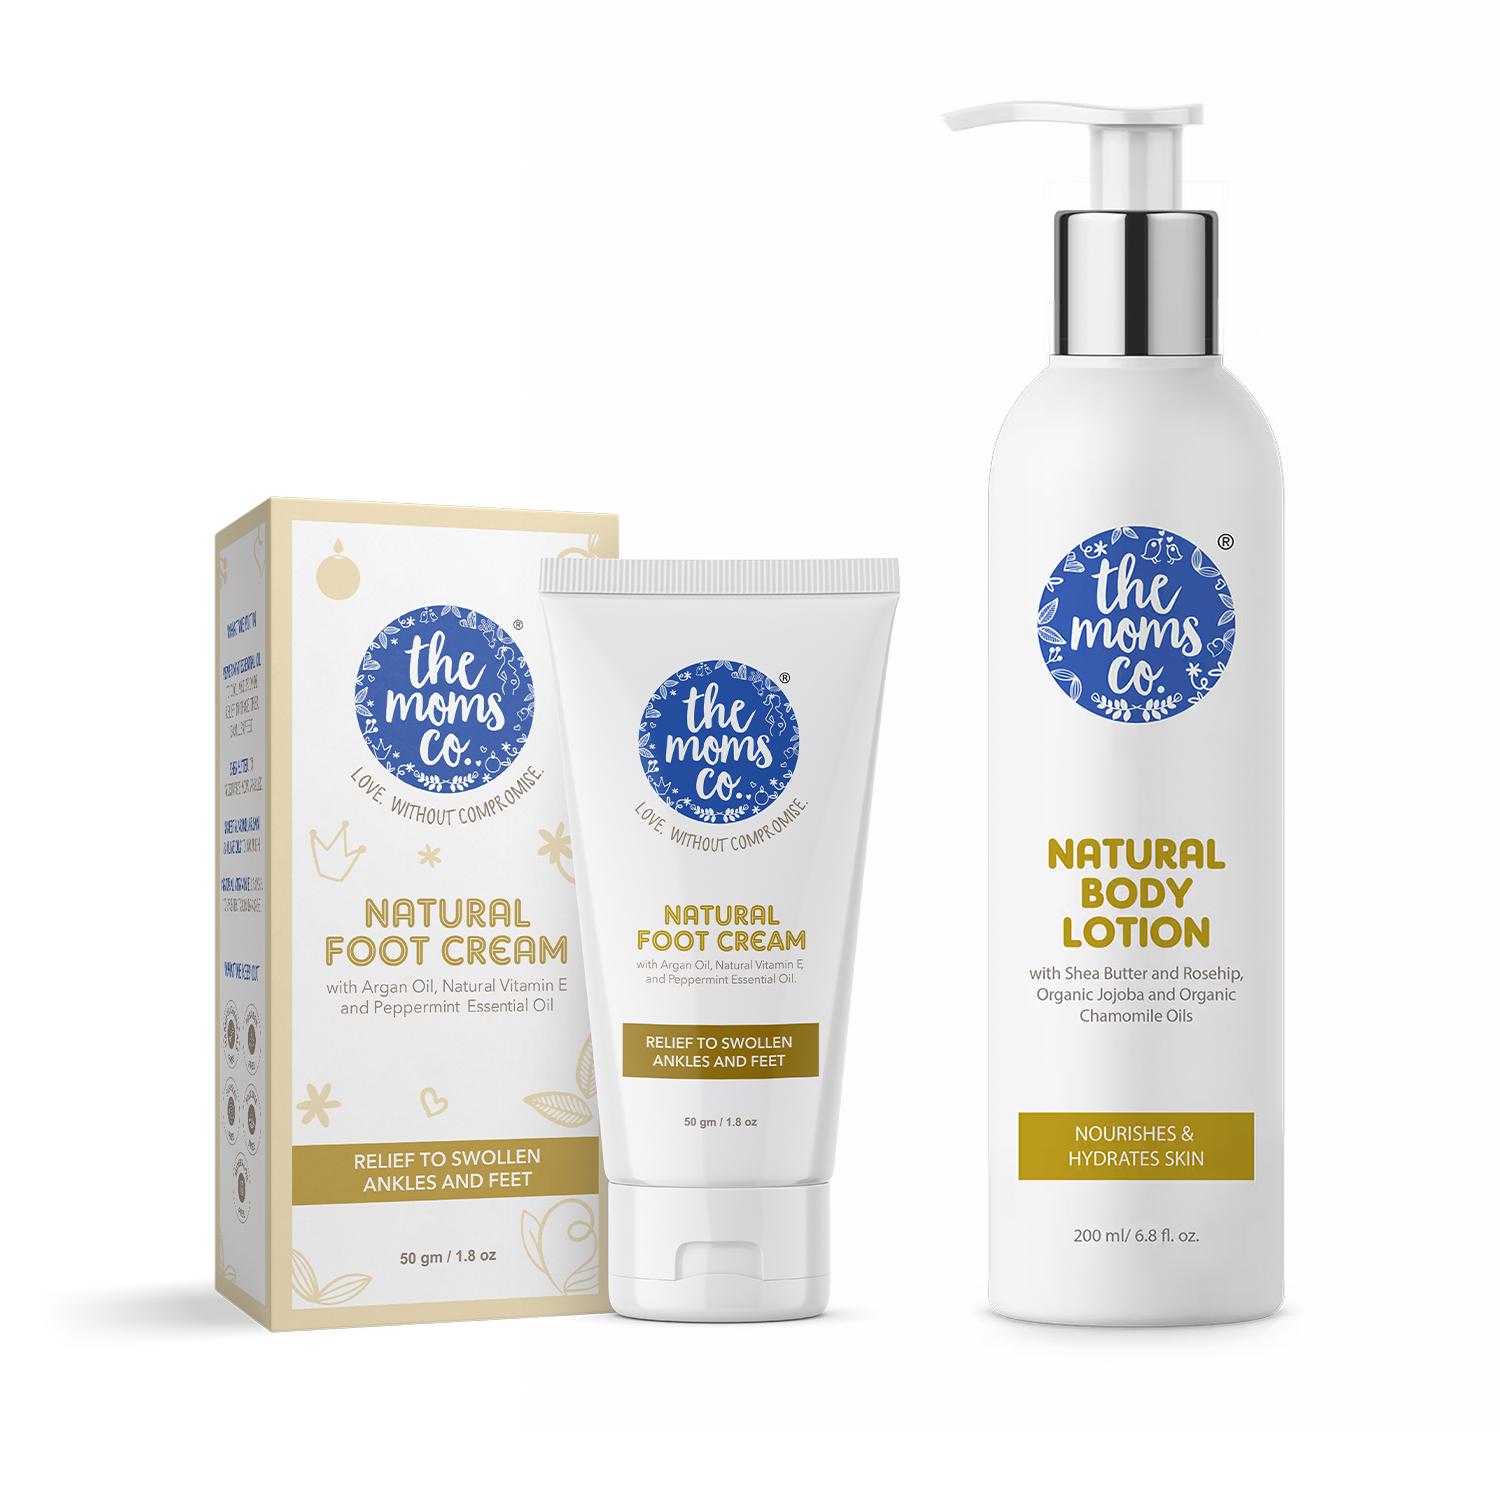 The Mom's Co. | The Mom's Co. Natural Body Lotion & Natural Foot Cream Combo